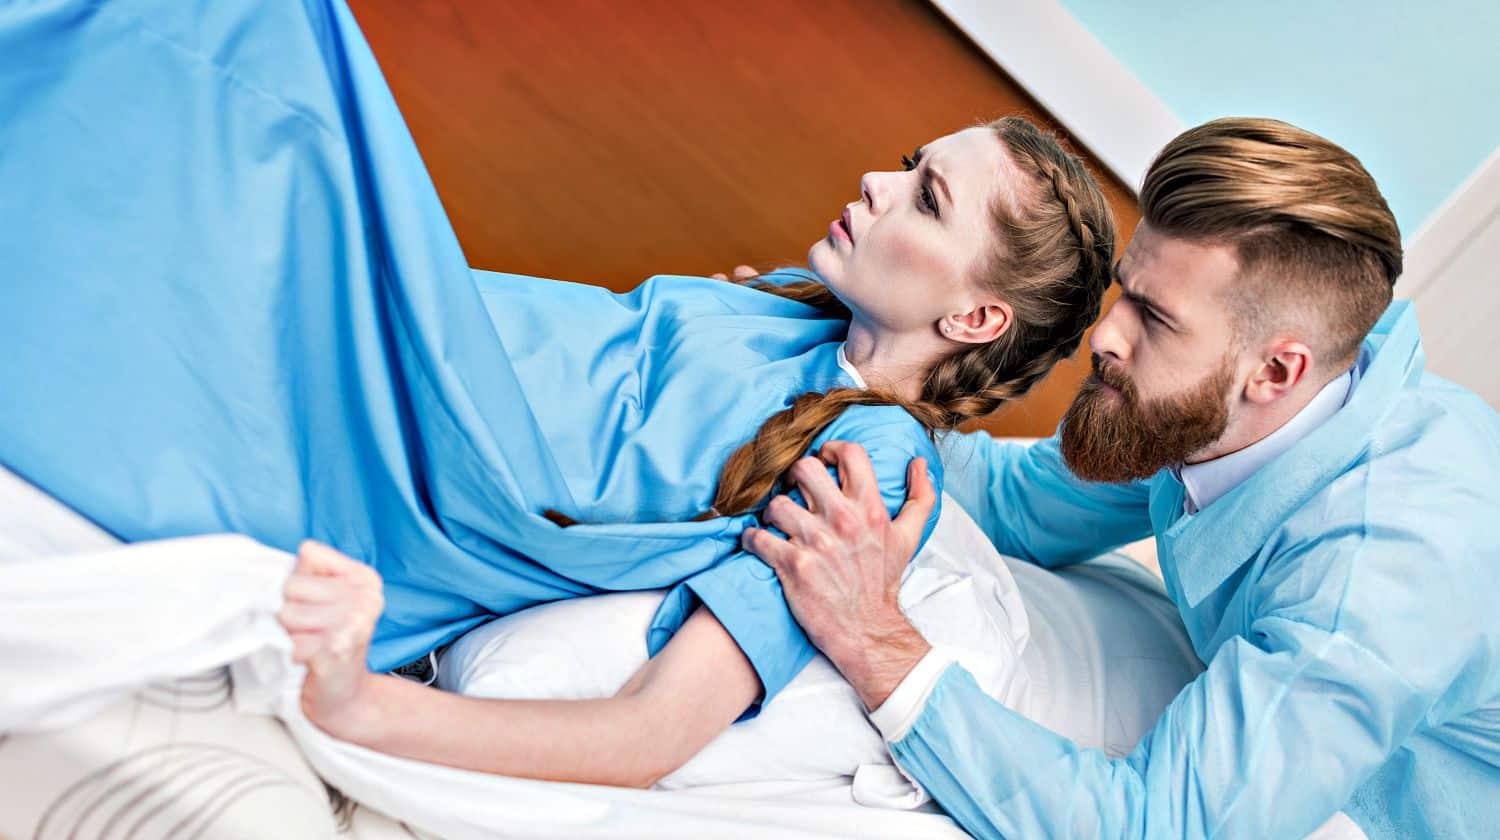 Feature | Woman giving birth in the hospital with her husband | Vaginal Birth: What To Expect